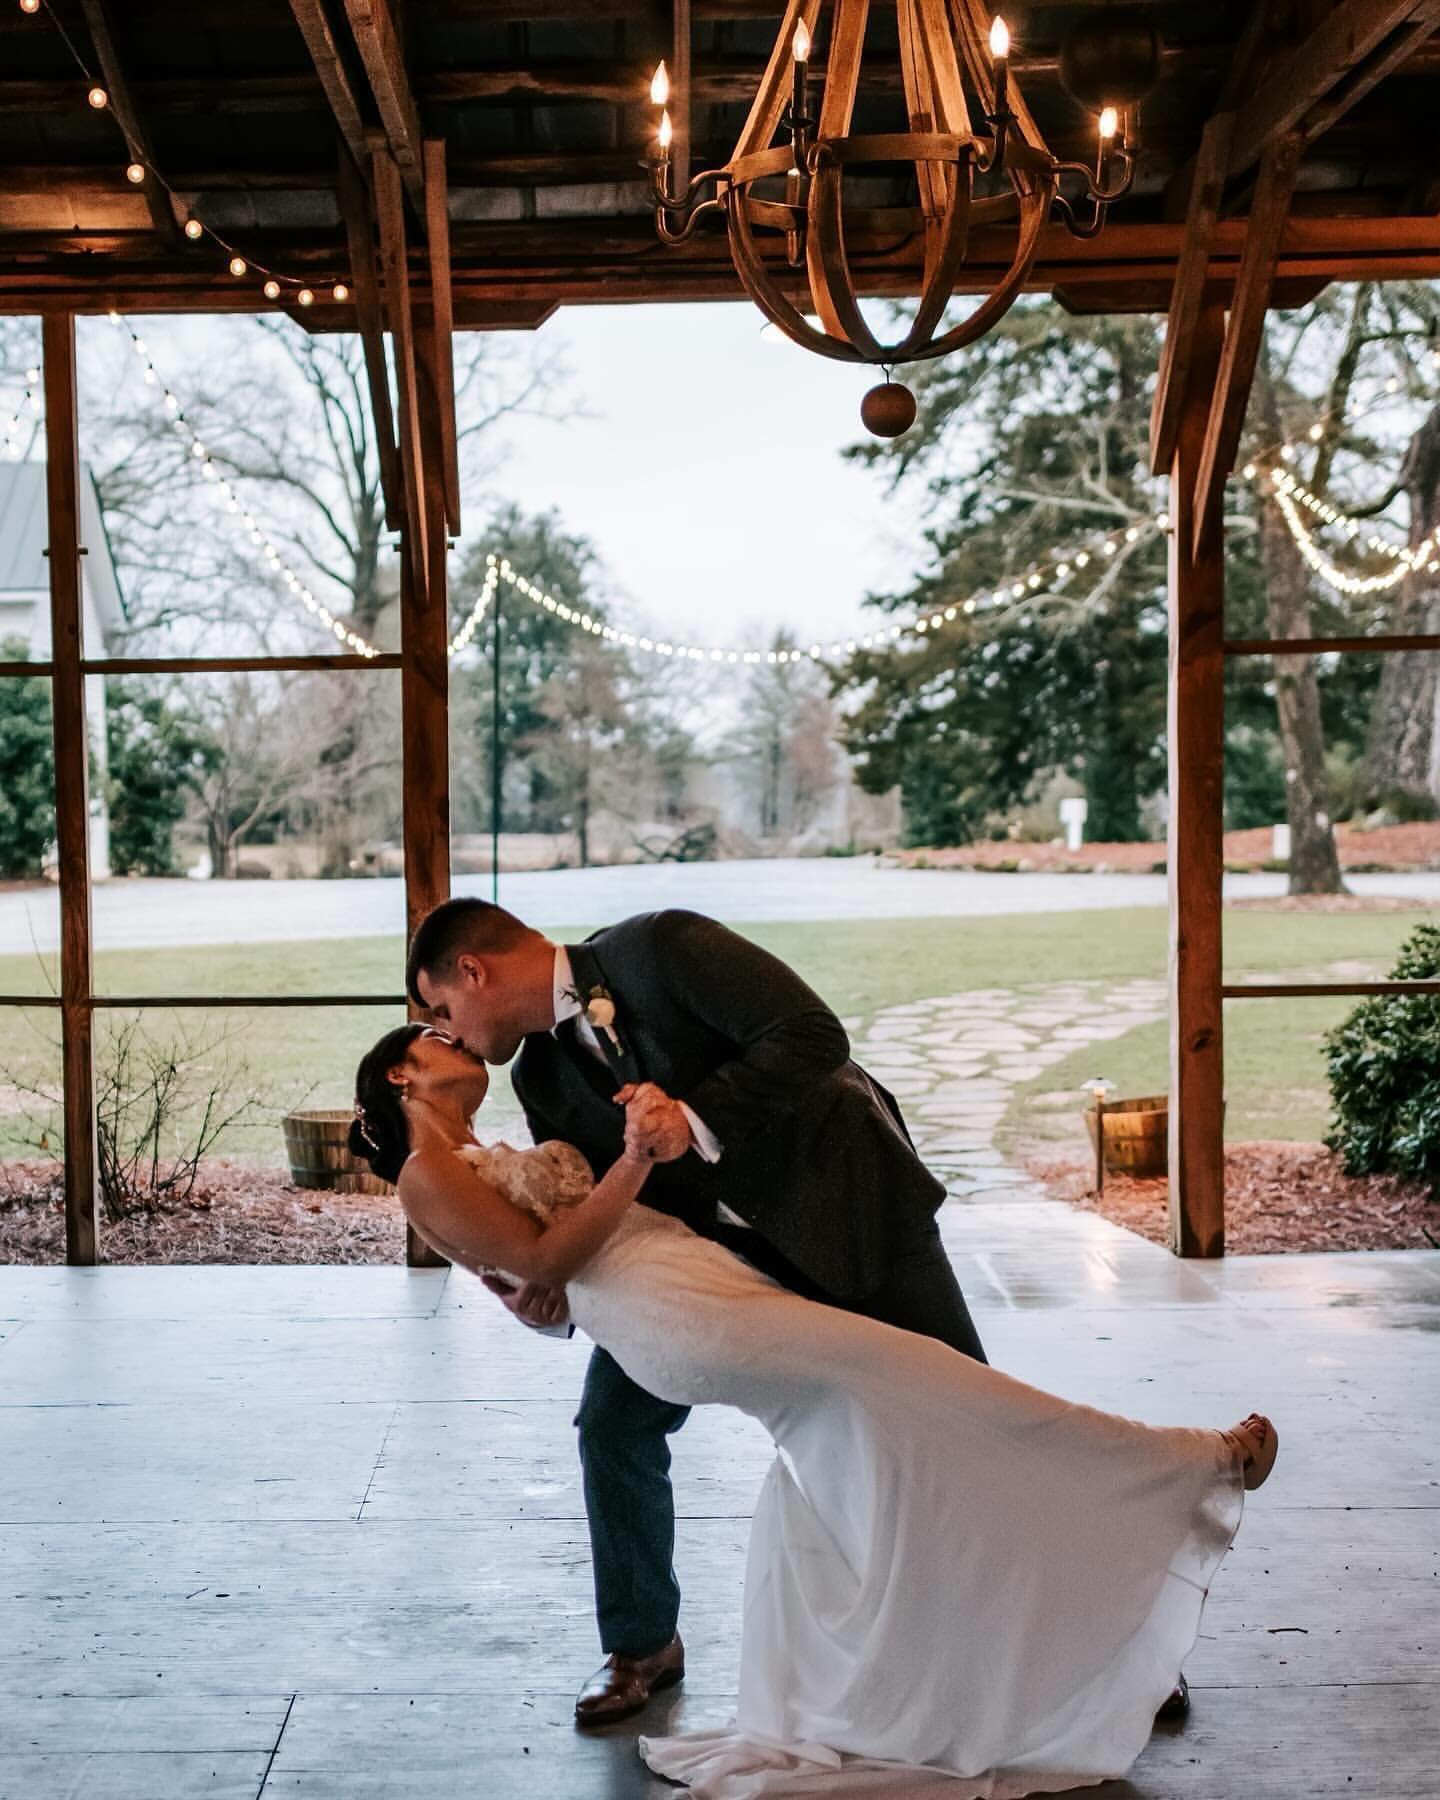 This moment. This view.
Are you considering a private last dance? We think it&rsquo;s such a romantic moment. What do you think?

Photo: @renee_vanderwal_photography 
Venue: @cloverleaffarm
Floral + Decor: @adedesignstudio
Catering + Service: @a_divi